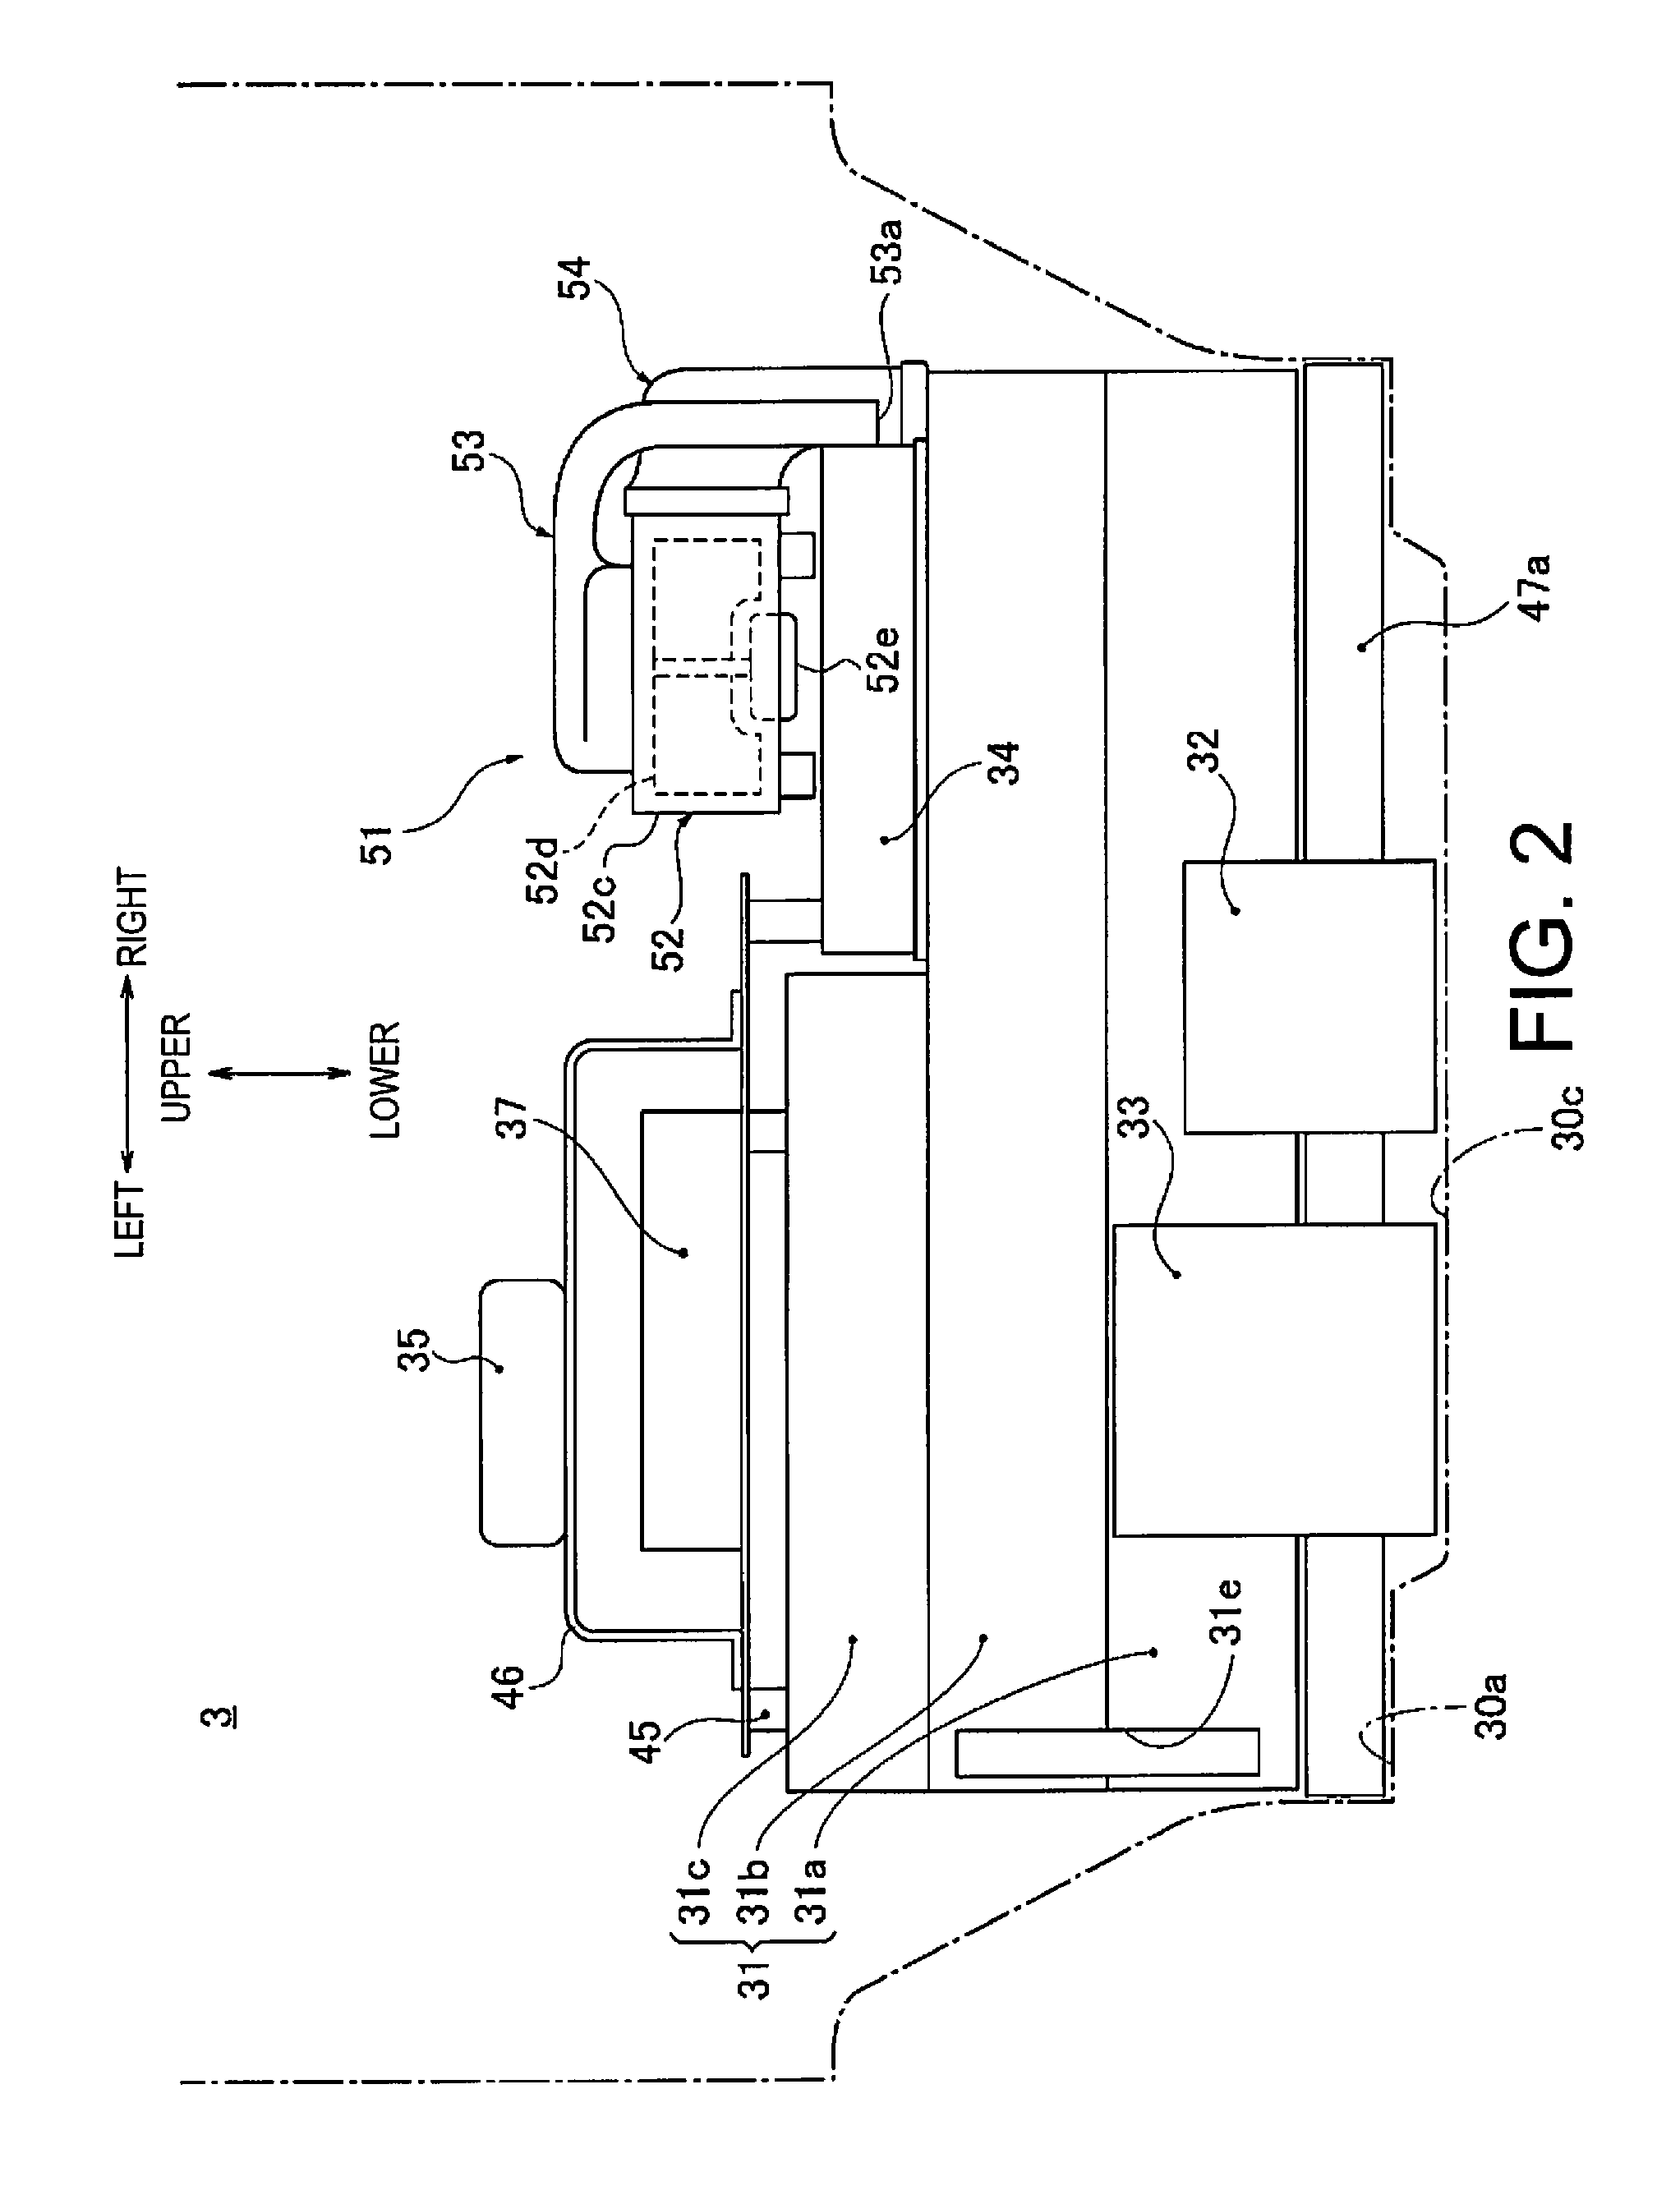 Battery system component layout structure for electrically driven vehicle